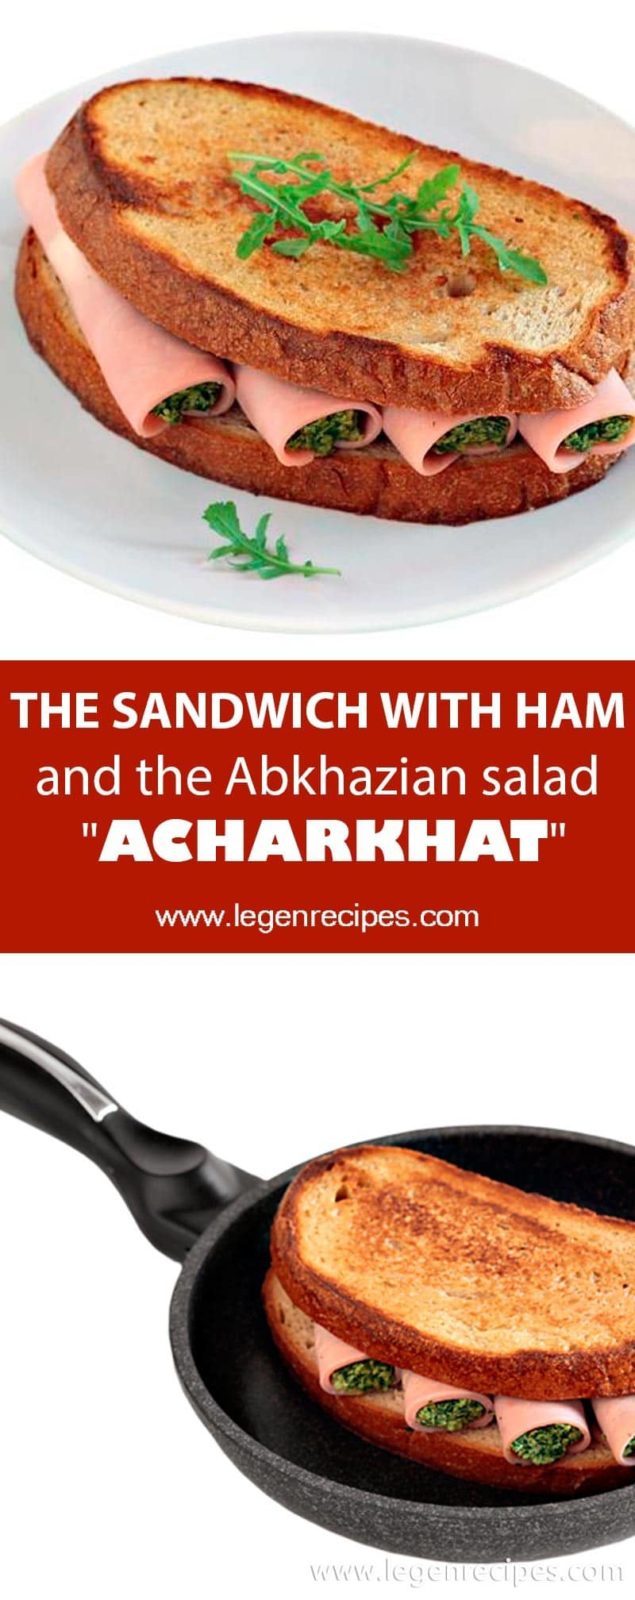 The sandwich with ham and the Abkhazian salad "acharkhat"